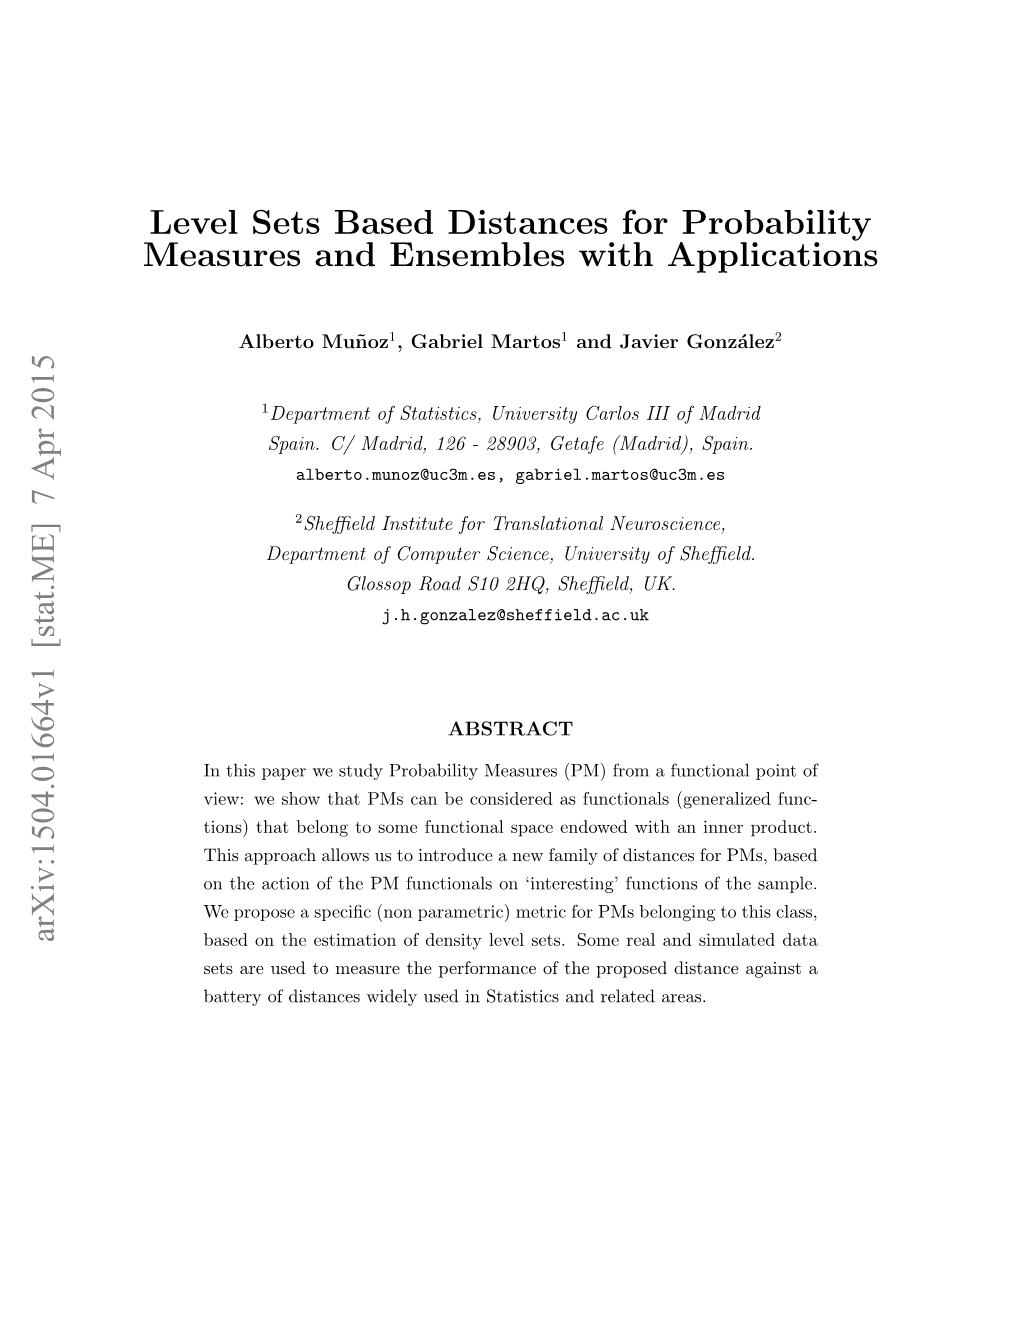 Level Sets Based Distances for Probability Measures and Ensembles with Applications Arxiv:1504.01664V1 [Stat.ME] 7 Apr 2015